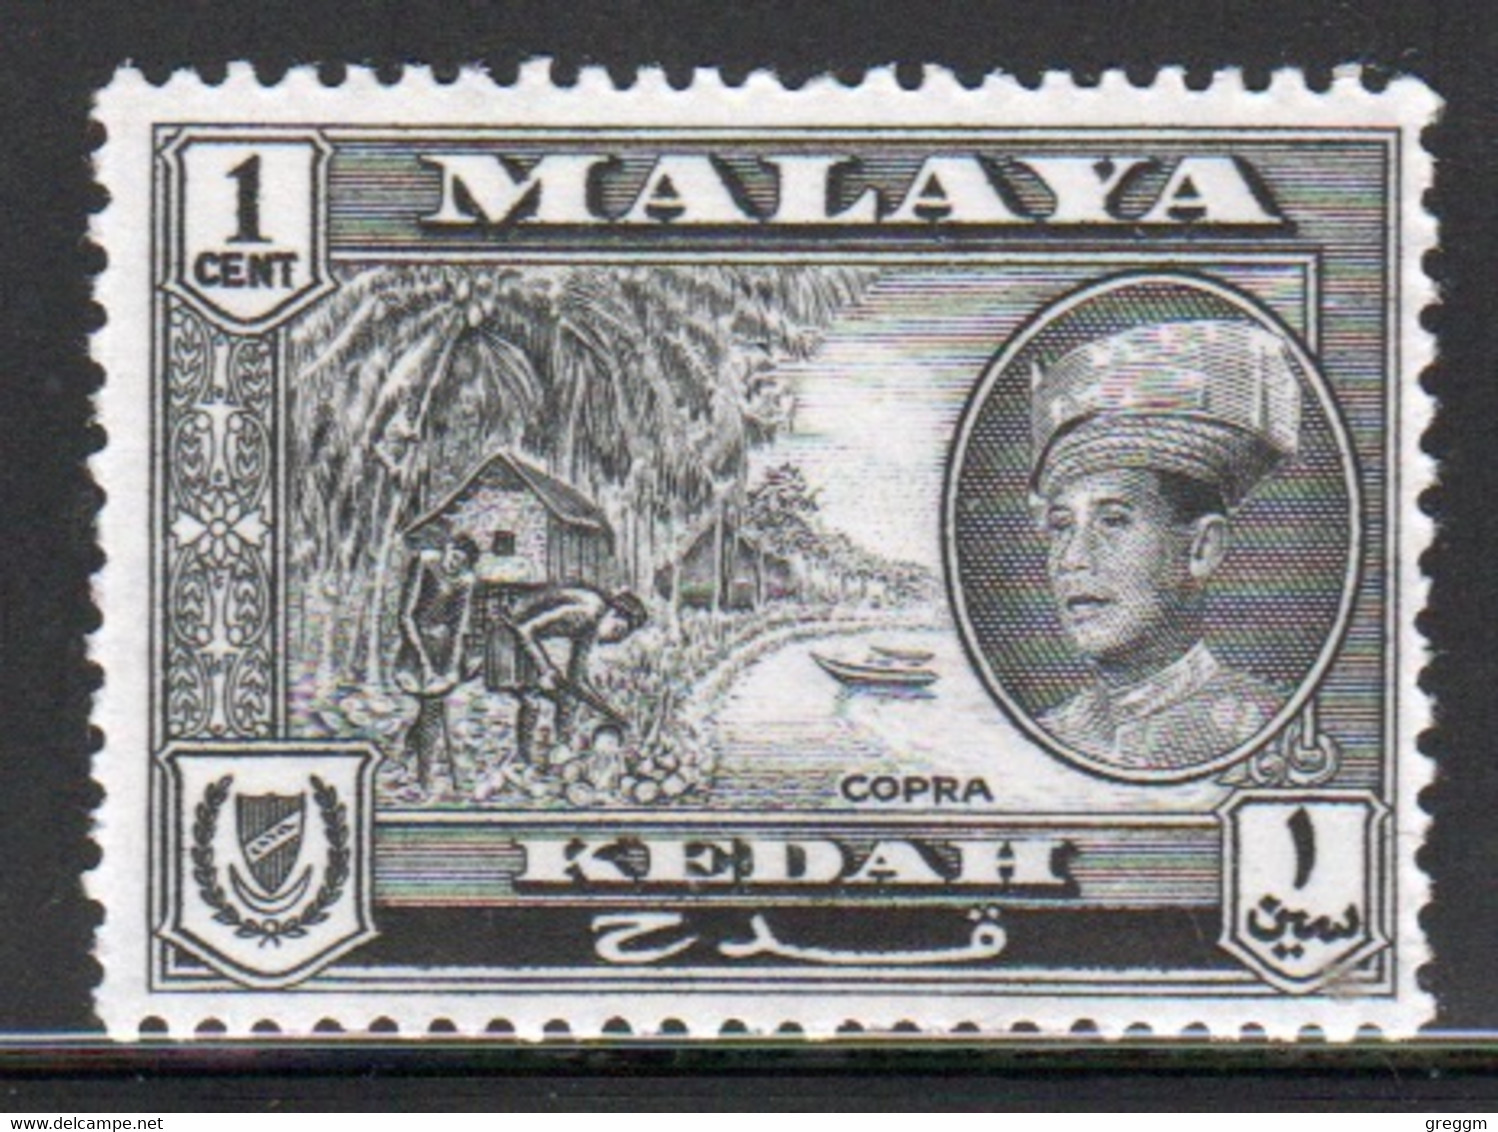 Malaysia Kedah 1959 Single 1c Definitive Stamp Which Is I Believe Cat No 104 In Mounted Mint - Kedah